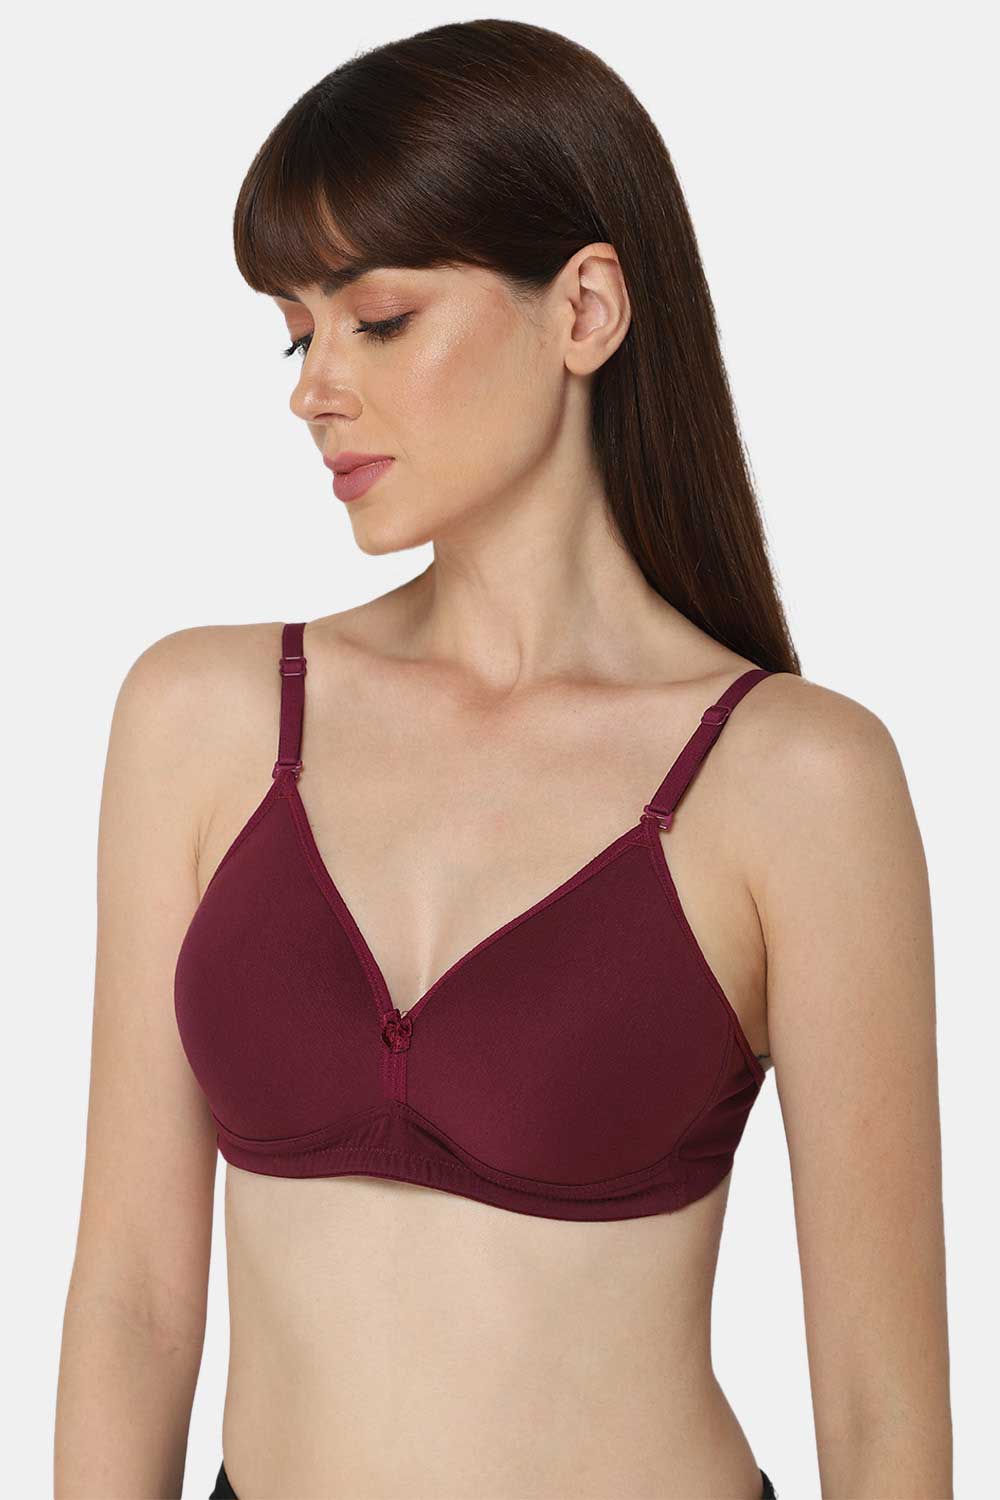 Buy Maroon Red Cotton Wirefree Padded Women Bra Online at Low Prices in  India 